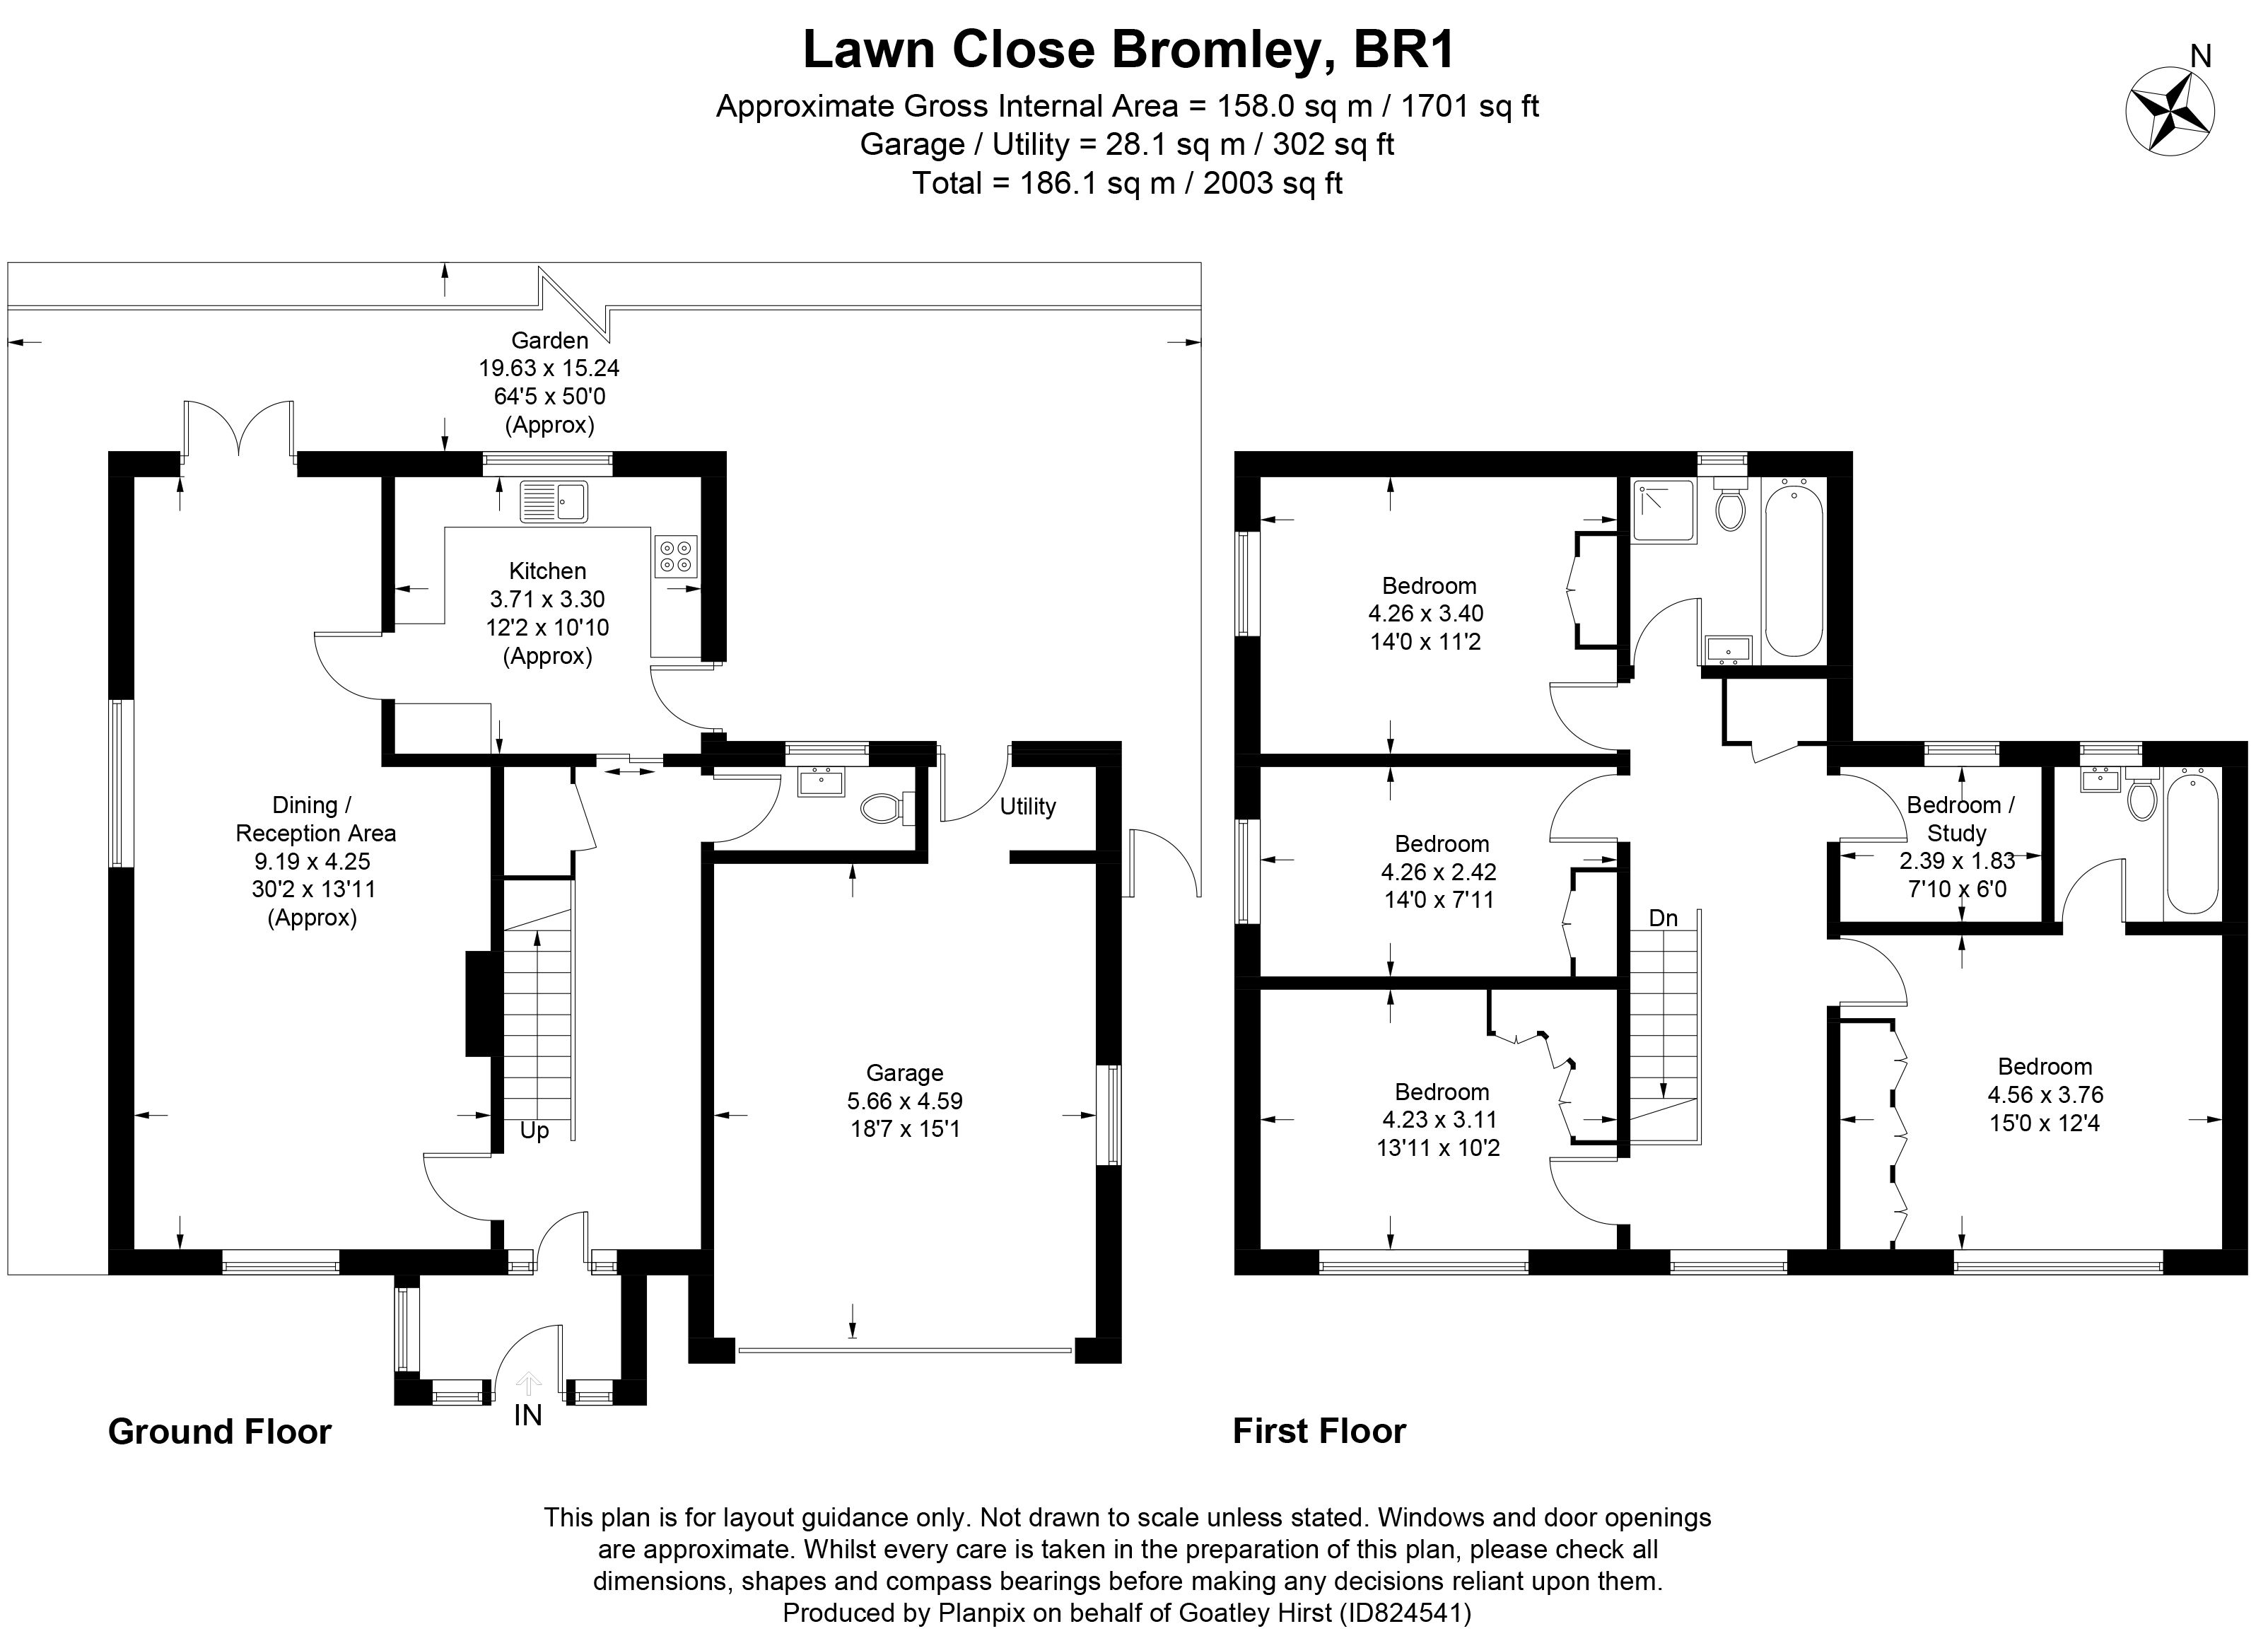 Floorplans For Lawn Close, Bromley, BR1